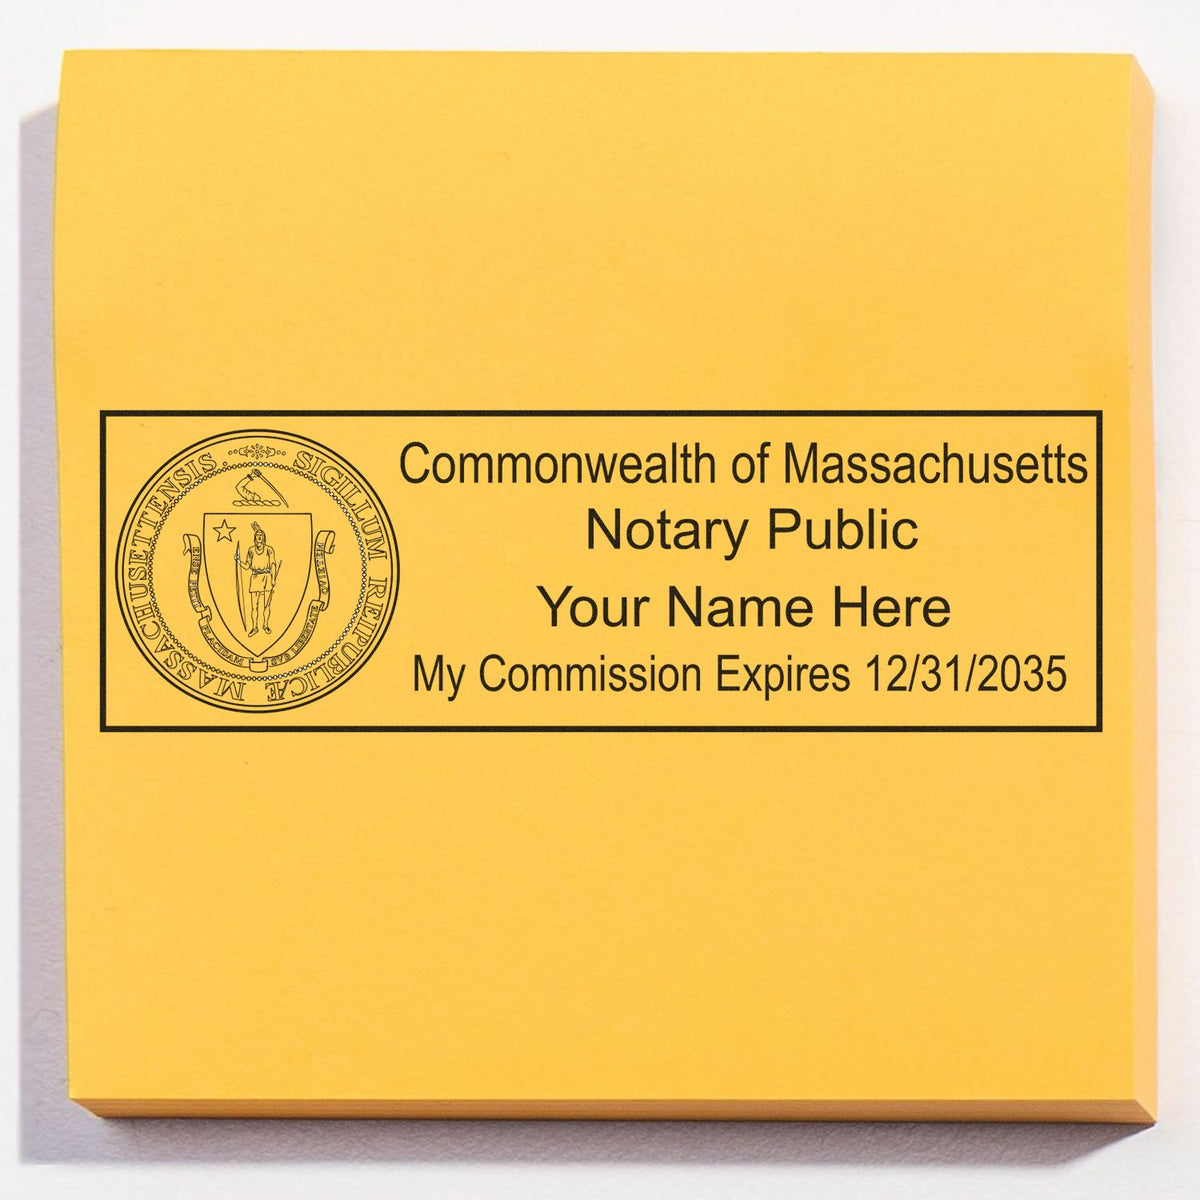 A lifestyle photo showing a stamped image of the Heavy-Duty Massachusetts Rectangular Notary Stamp on a piece of paper